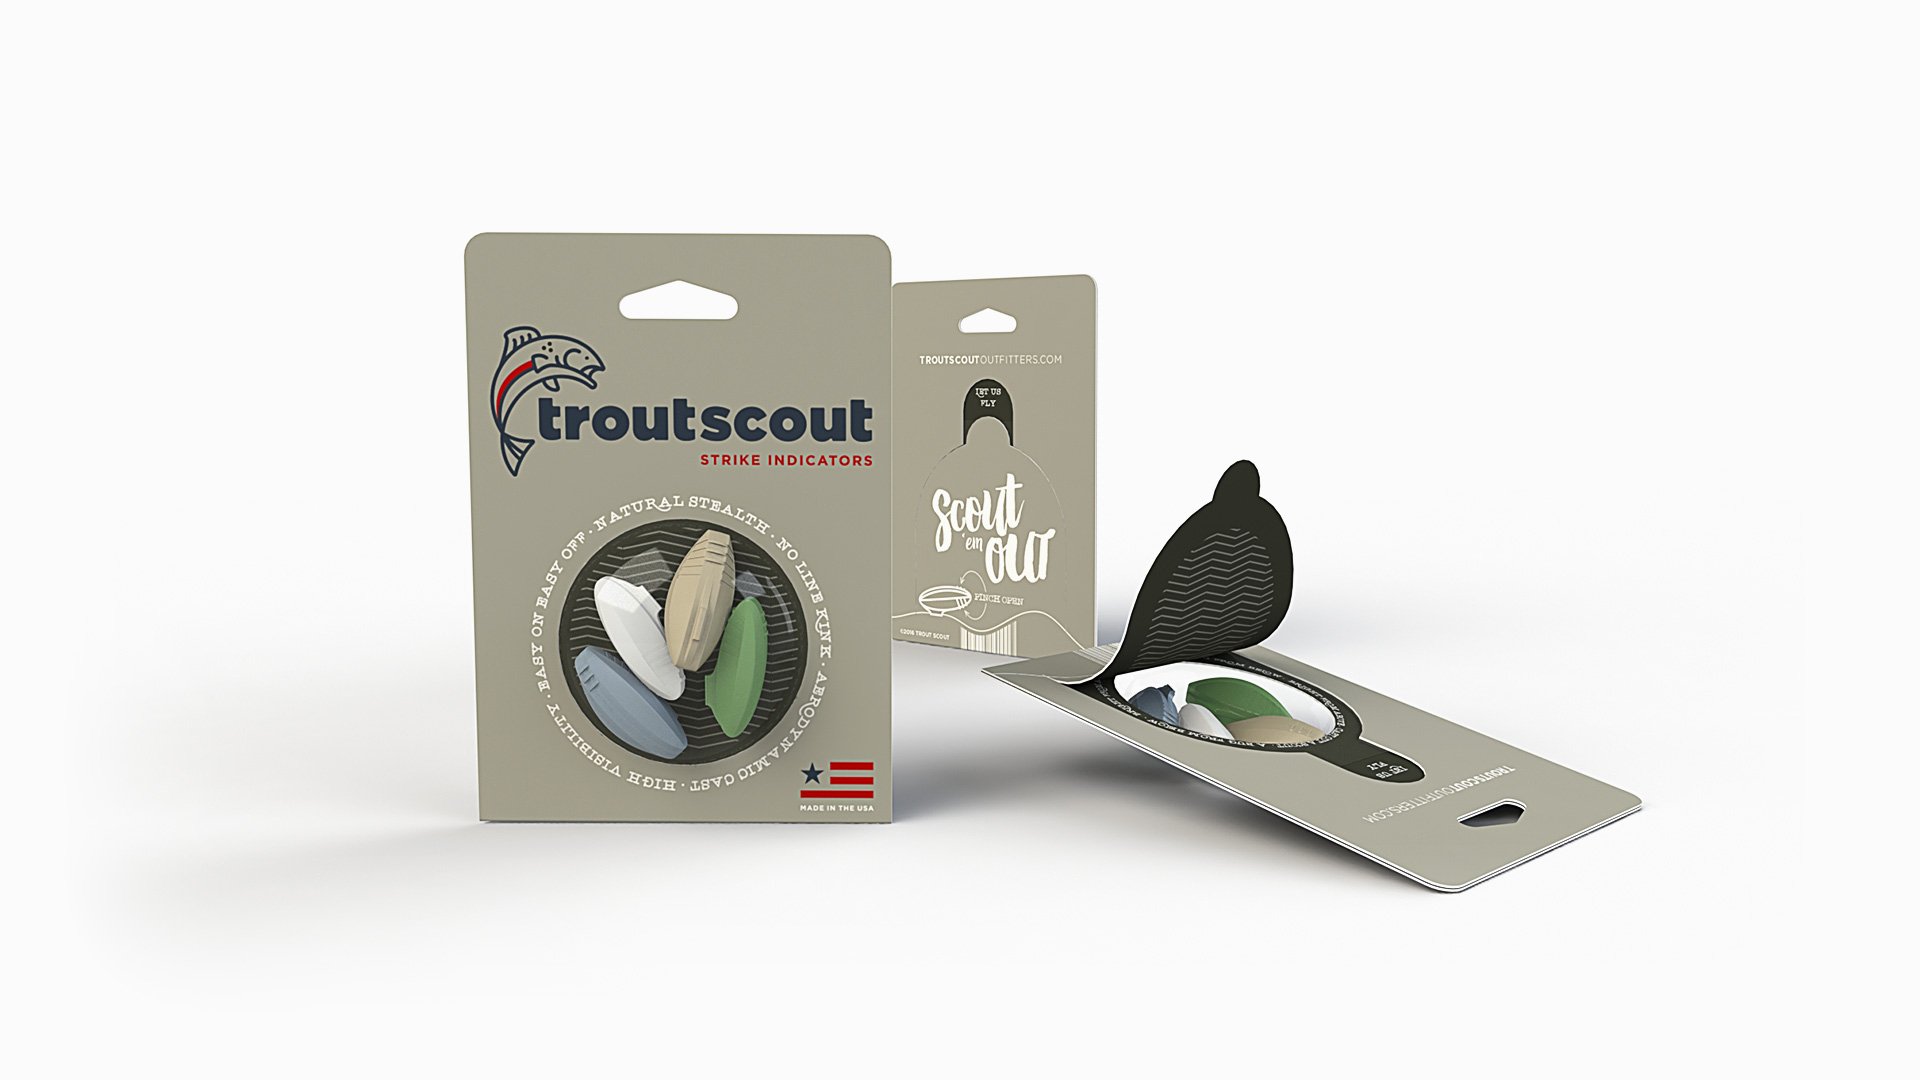 troutscout-outfitters-blister-packaging-design.jpg